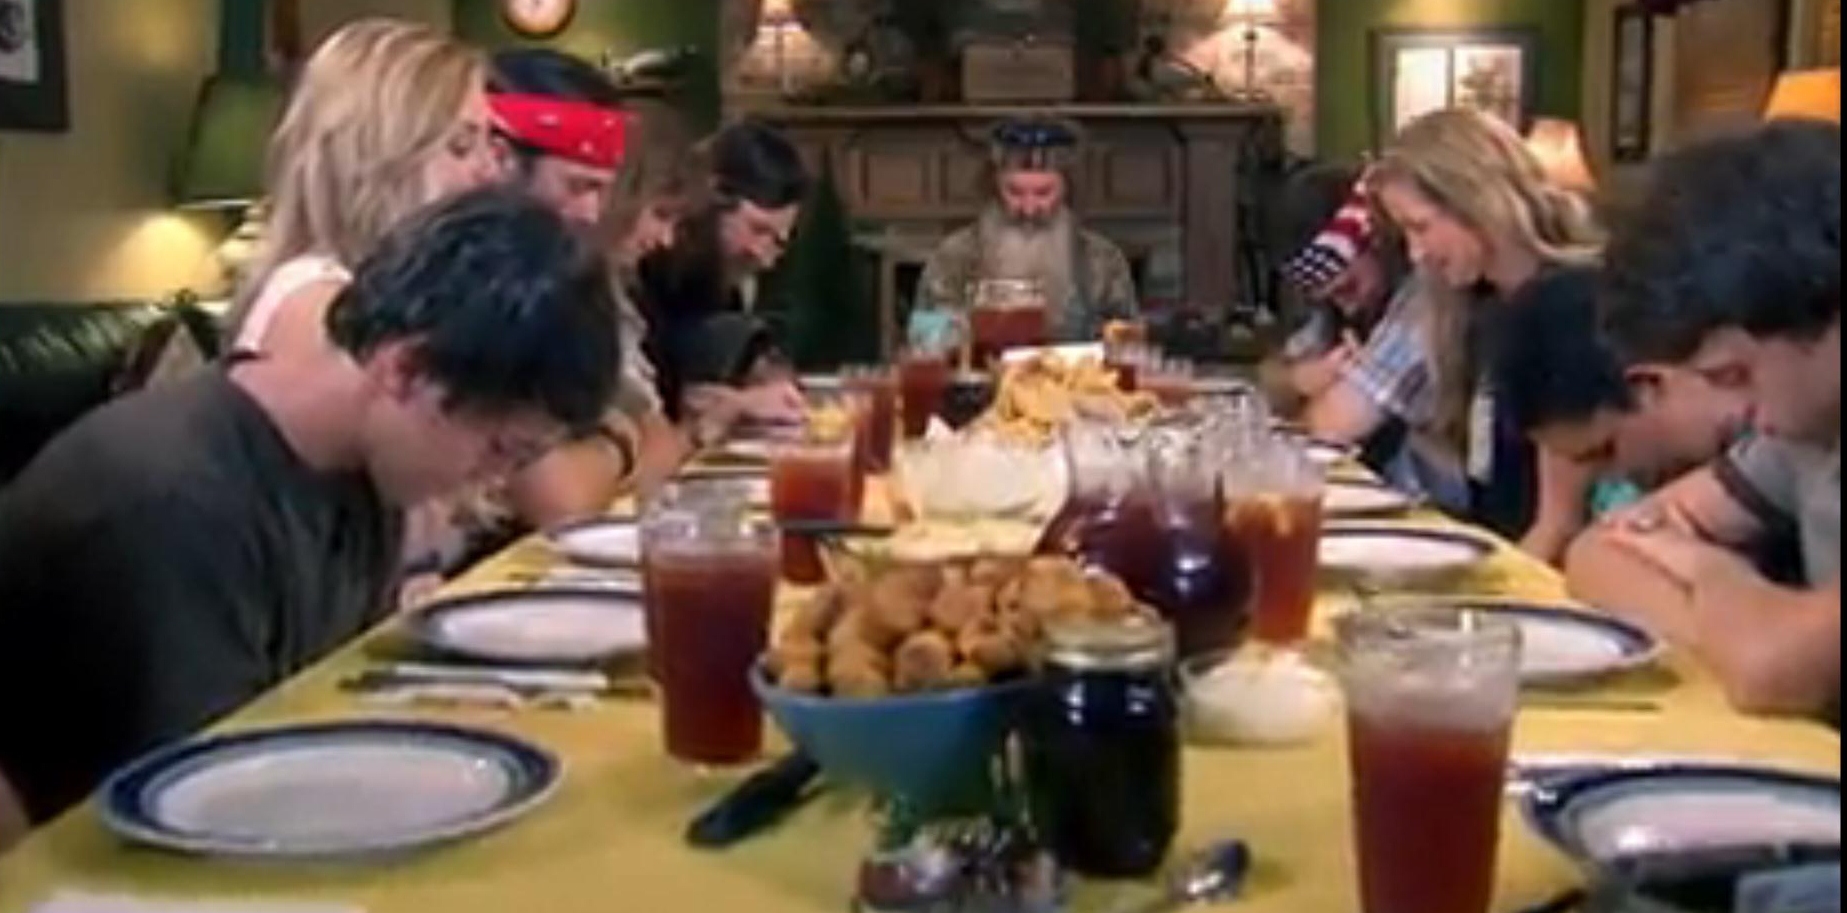 What Do You Think Of This Top Ten List For Why Duck Dynasty Is Popular